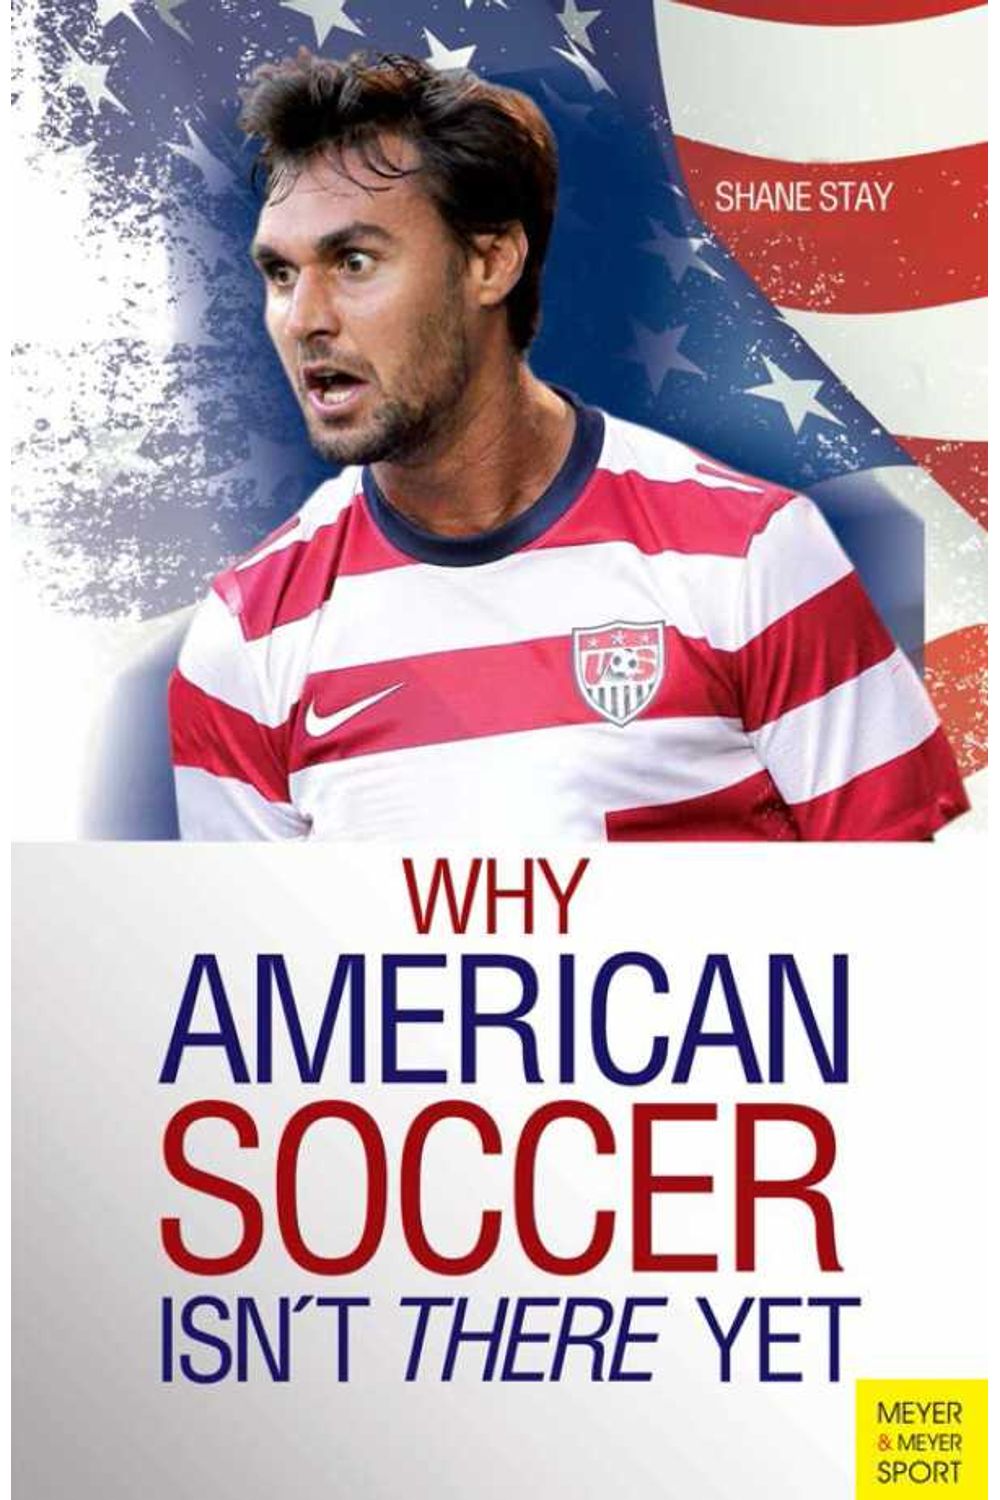 bw-why-american-soccer-isnt-there-yet-meyer-meyer-sport-9781782553595